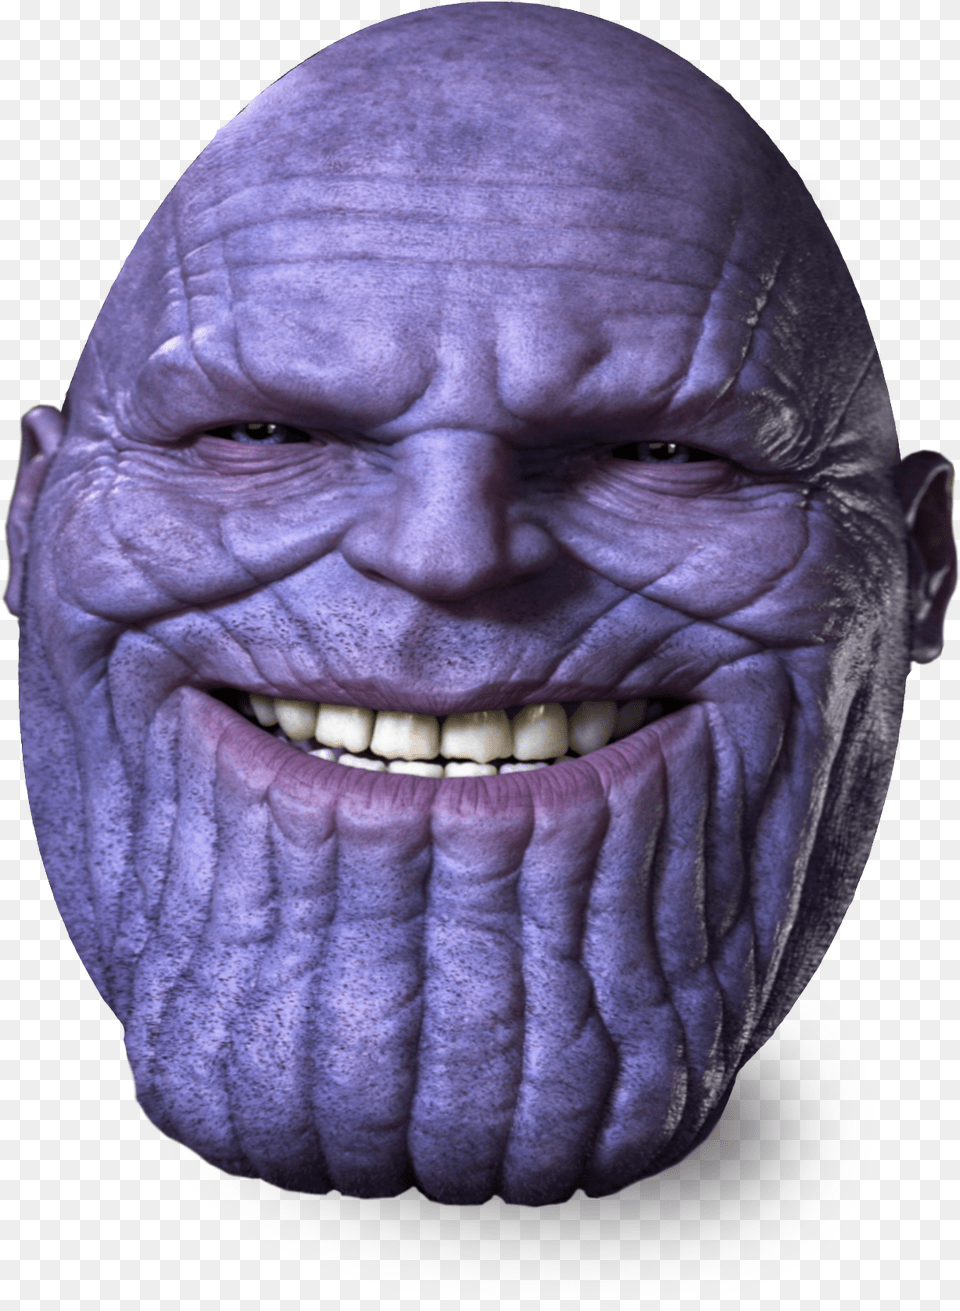 Download Thanos Egg Samdareeya Hotel And Multiplex, Head, Person, Face, Photography Png Image